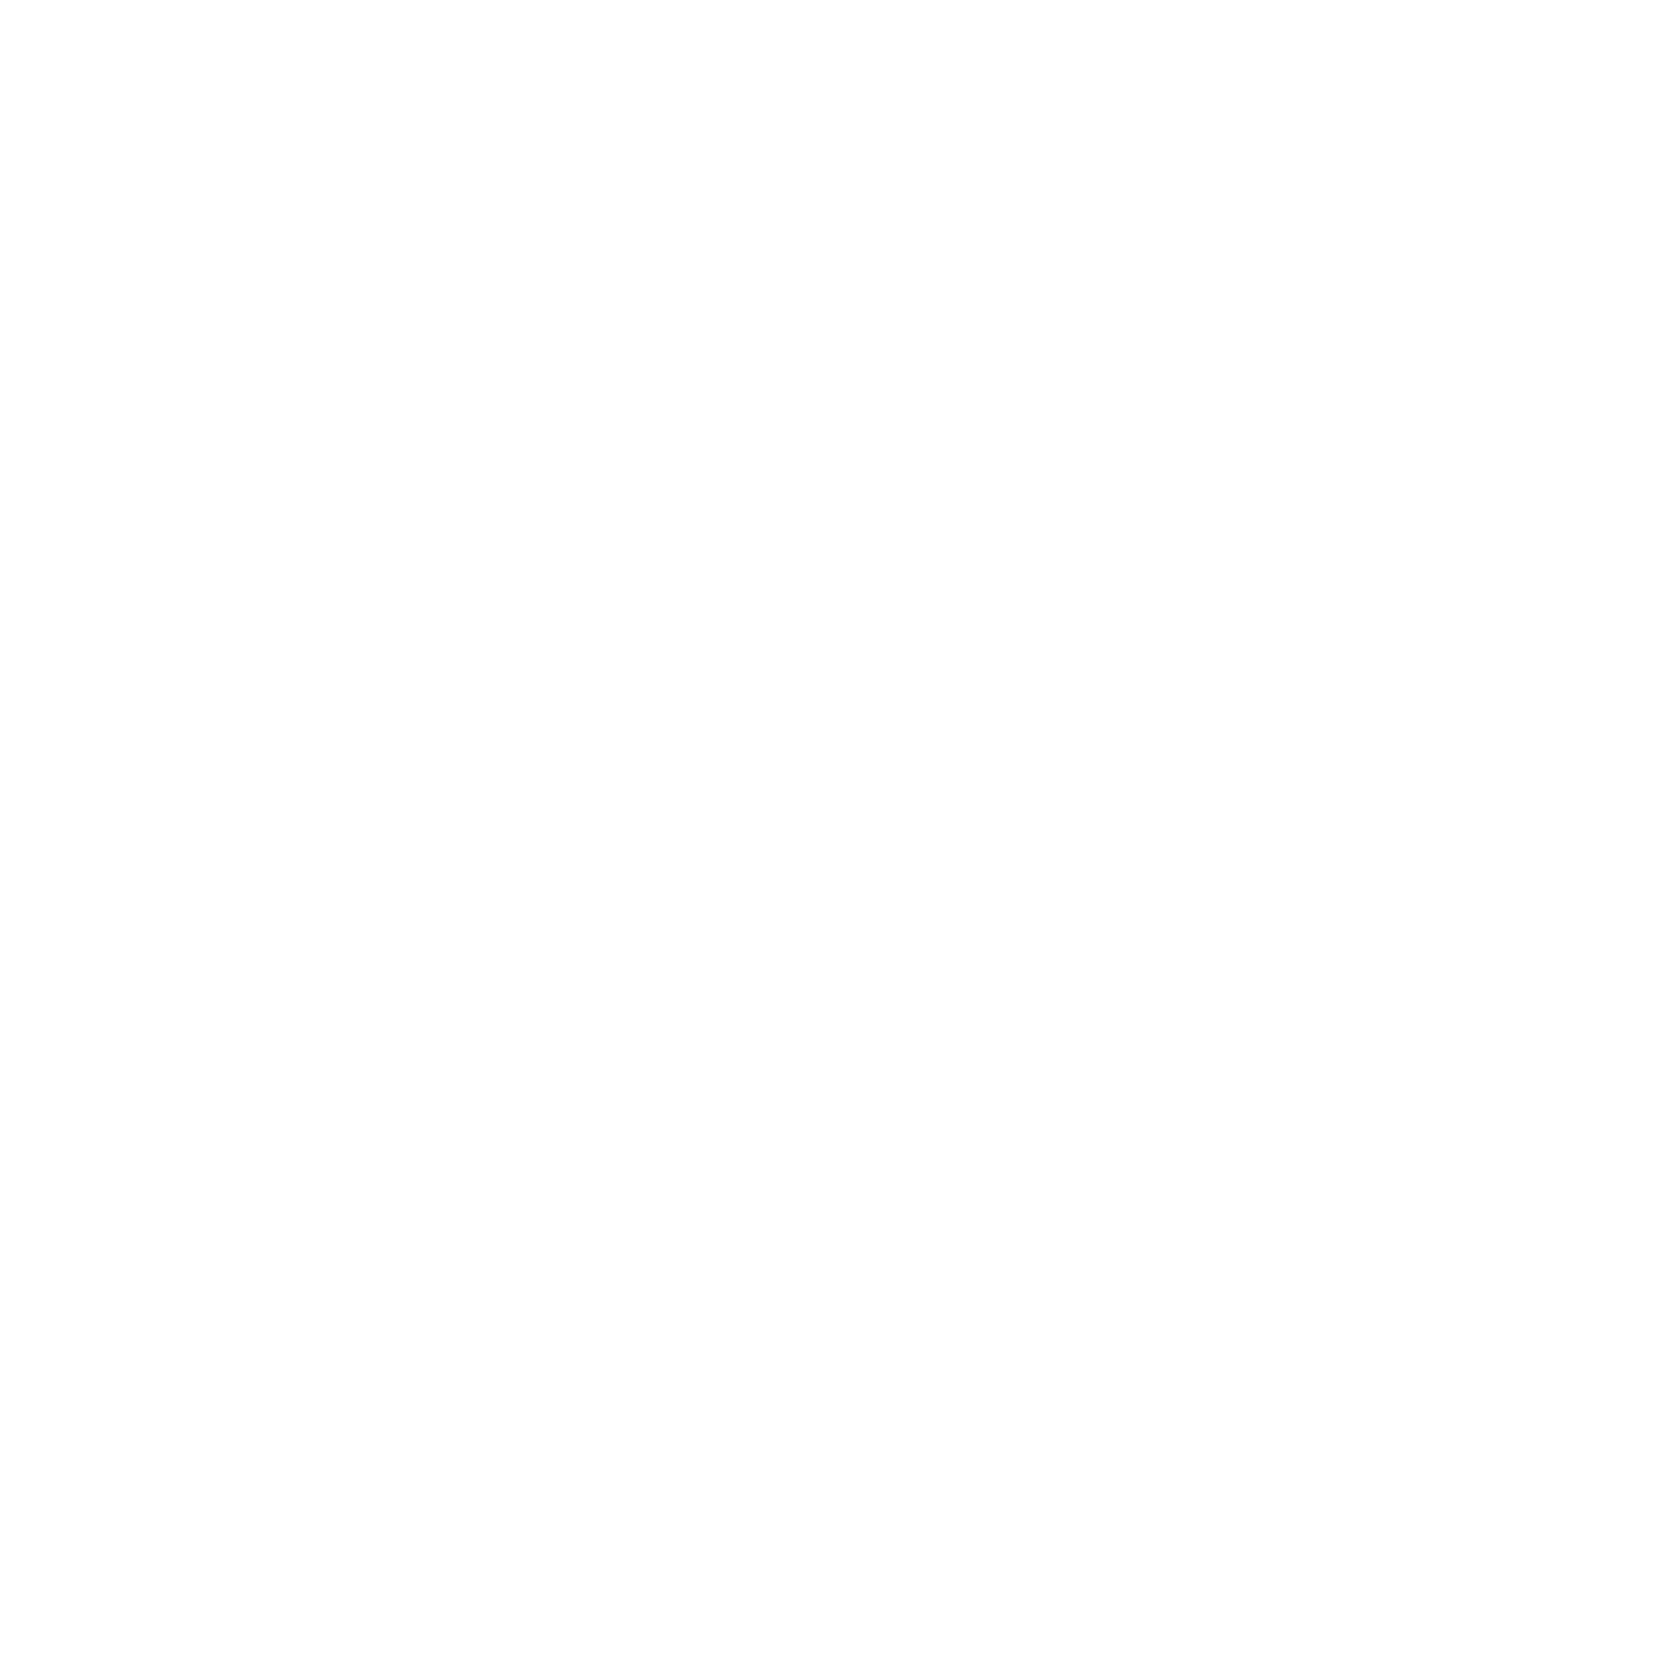 All Star Outfitters